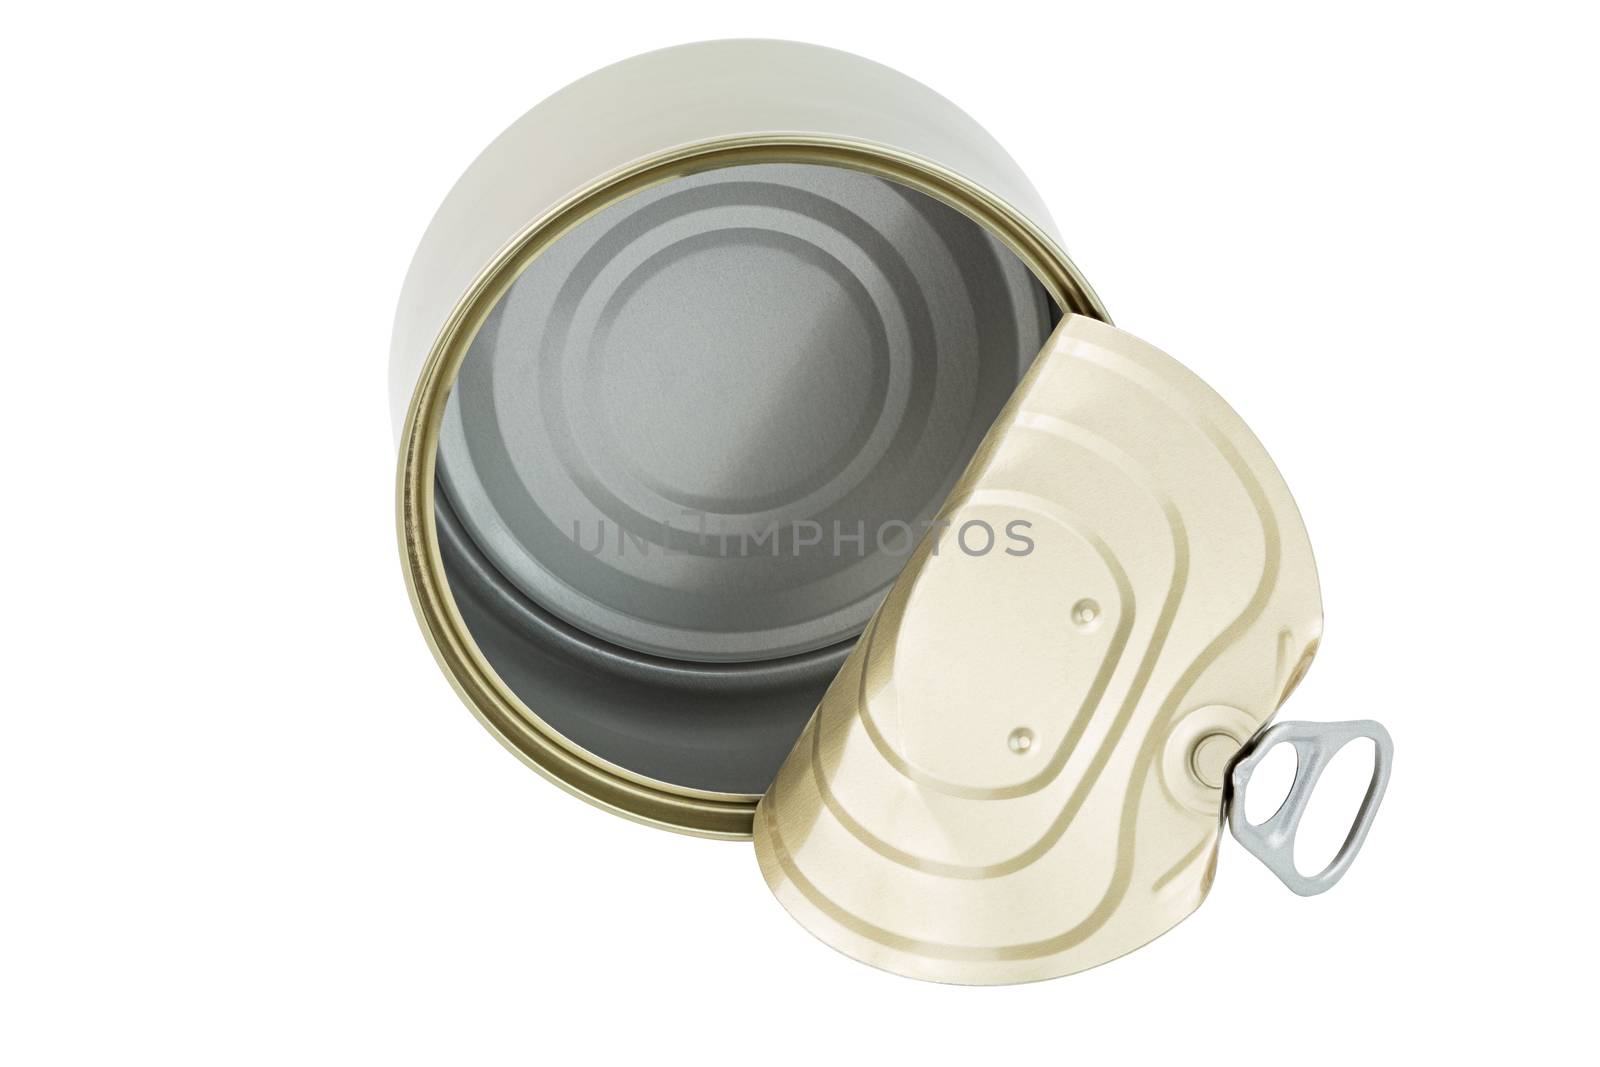 opened clean tin can with pull tab ring, bended lid and empty - isolated on white background, top-down view.